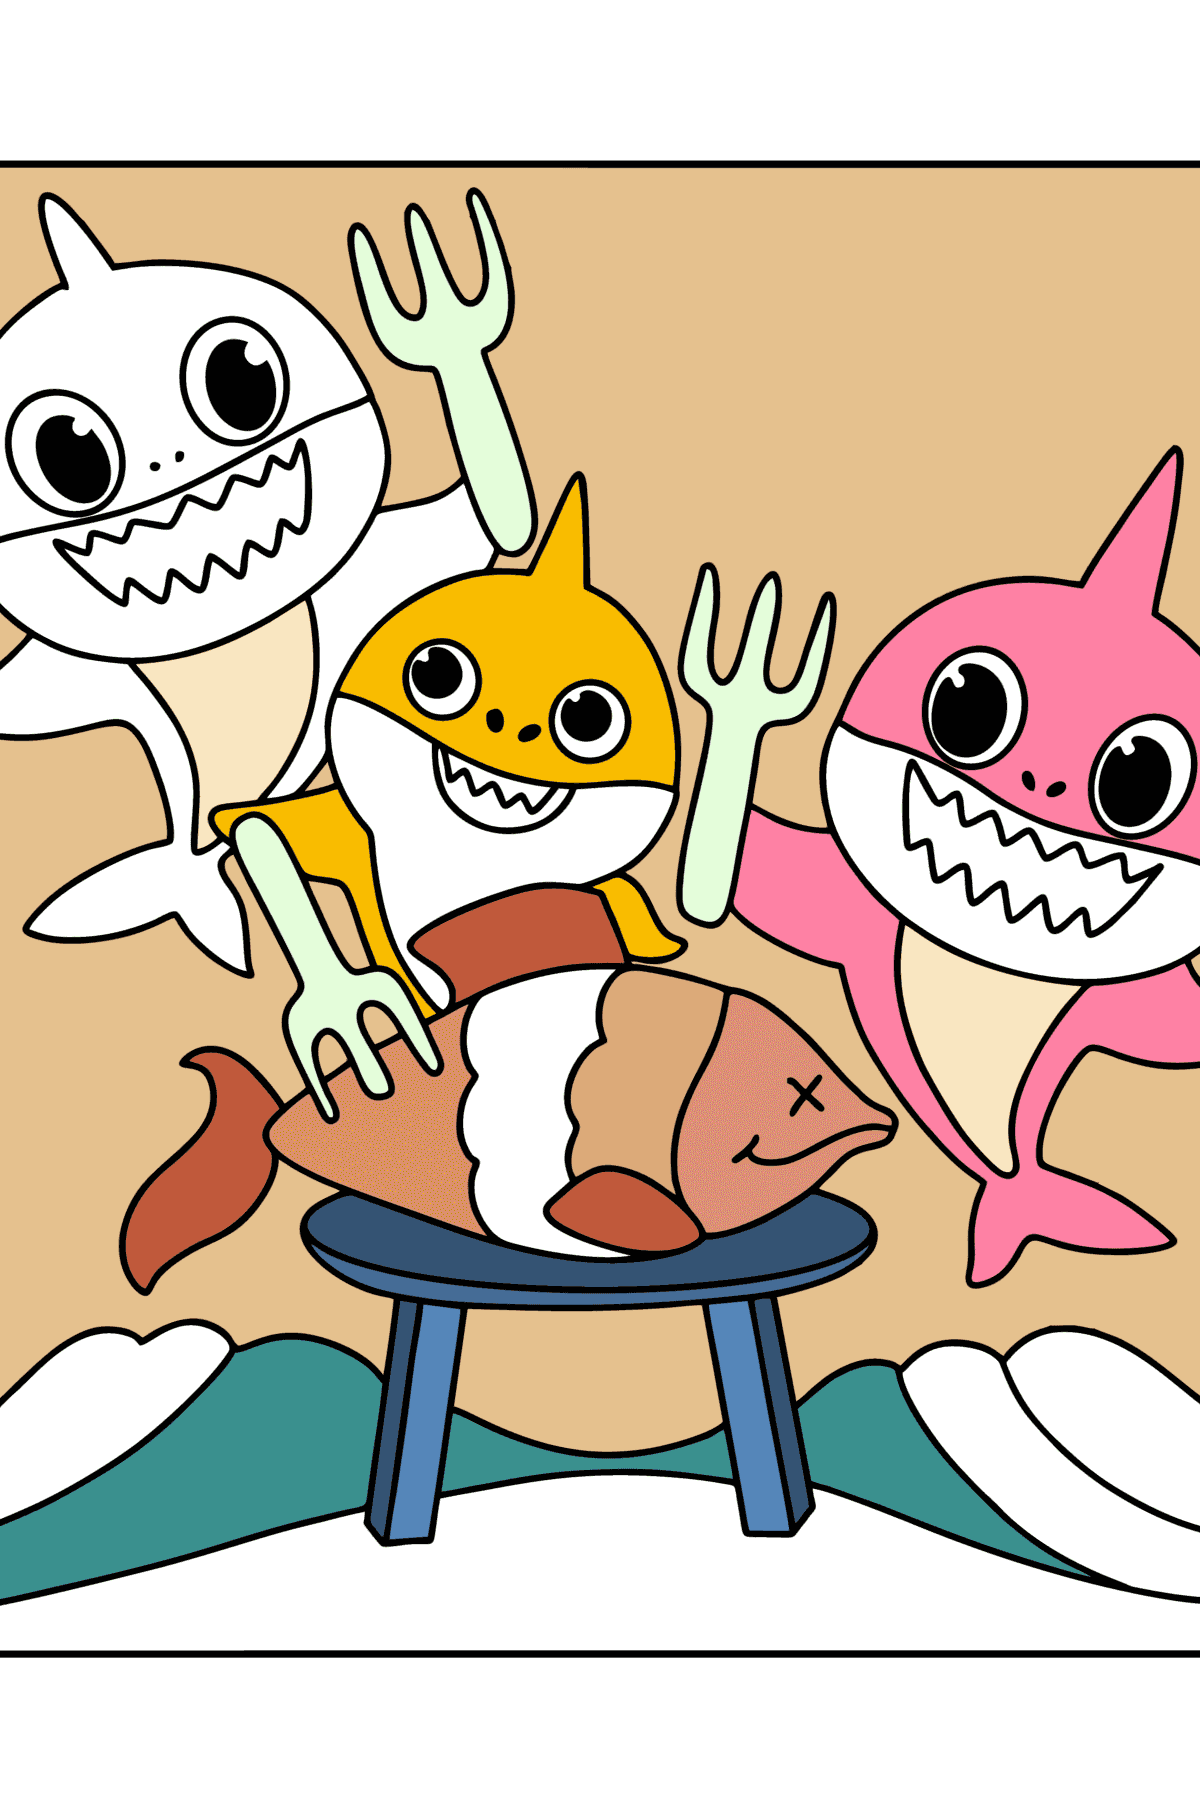 Baby shark Family coloring page - Coloring Pages for Kids